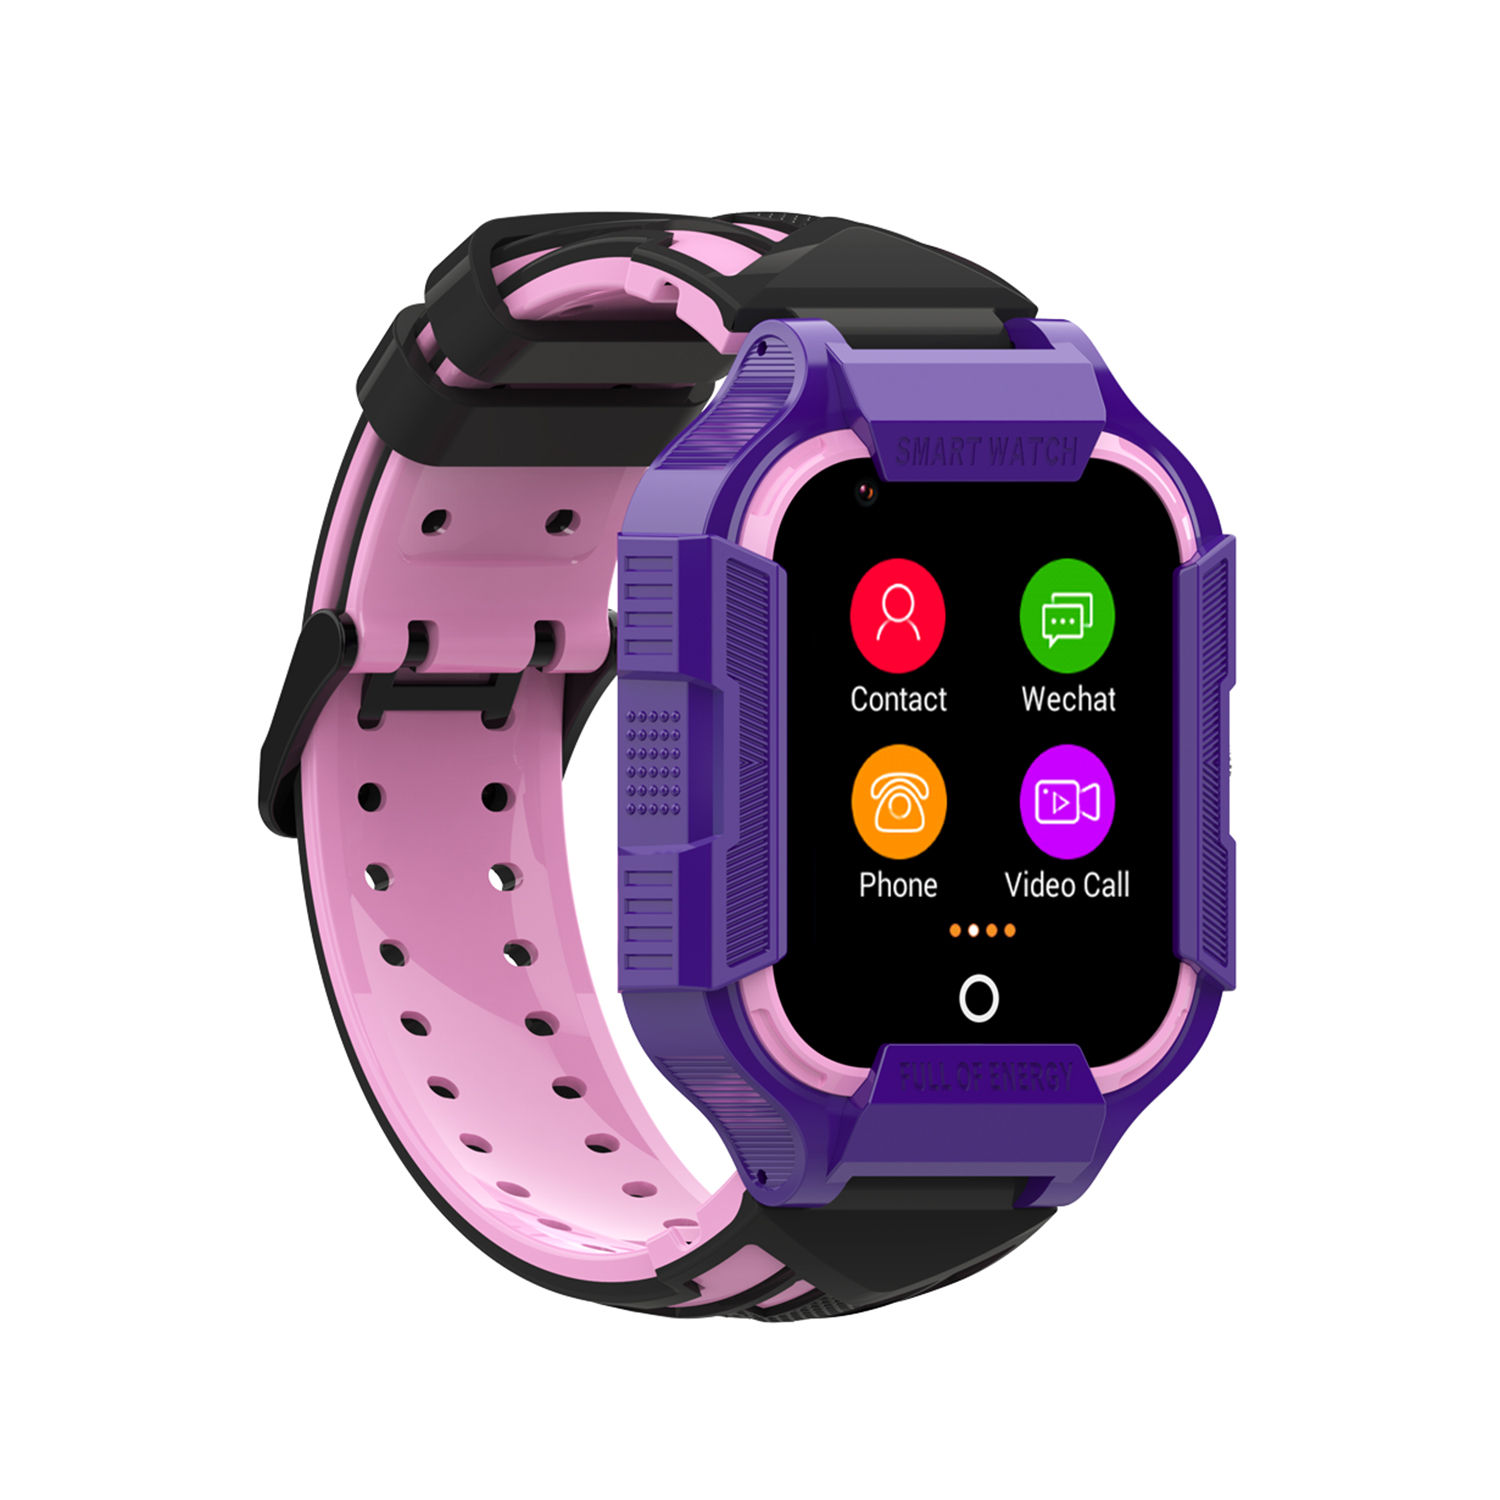 Quality LTE waterproof Students Watch Tracker with Video call GPS 